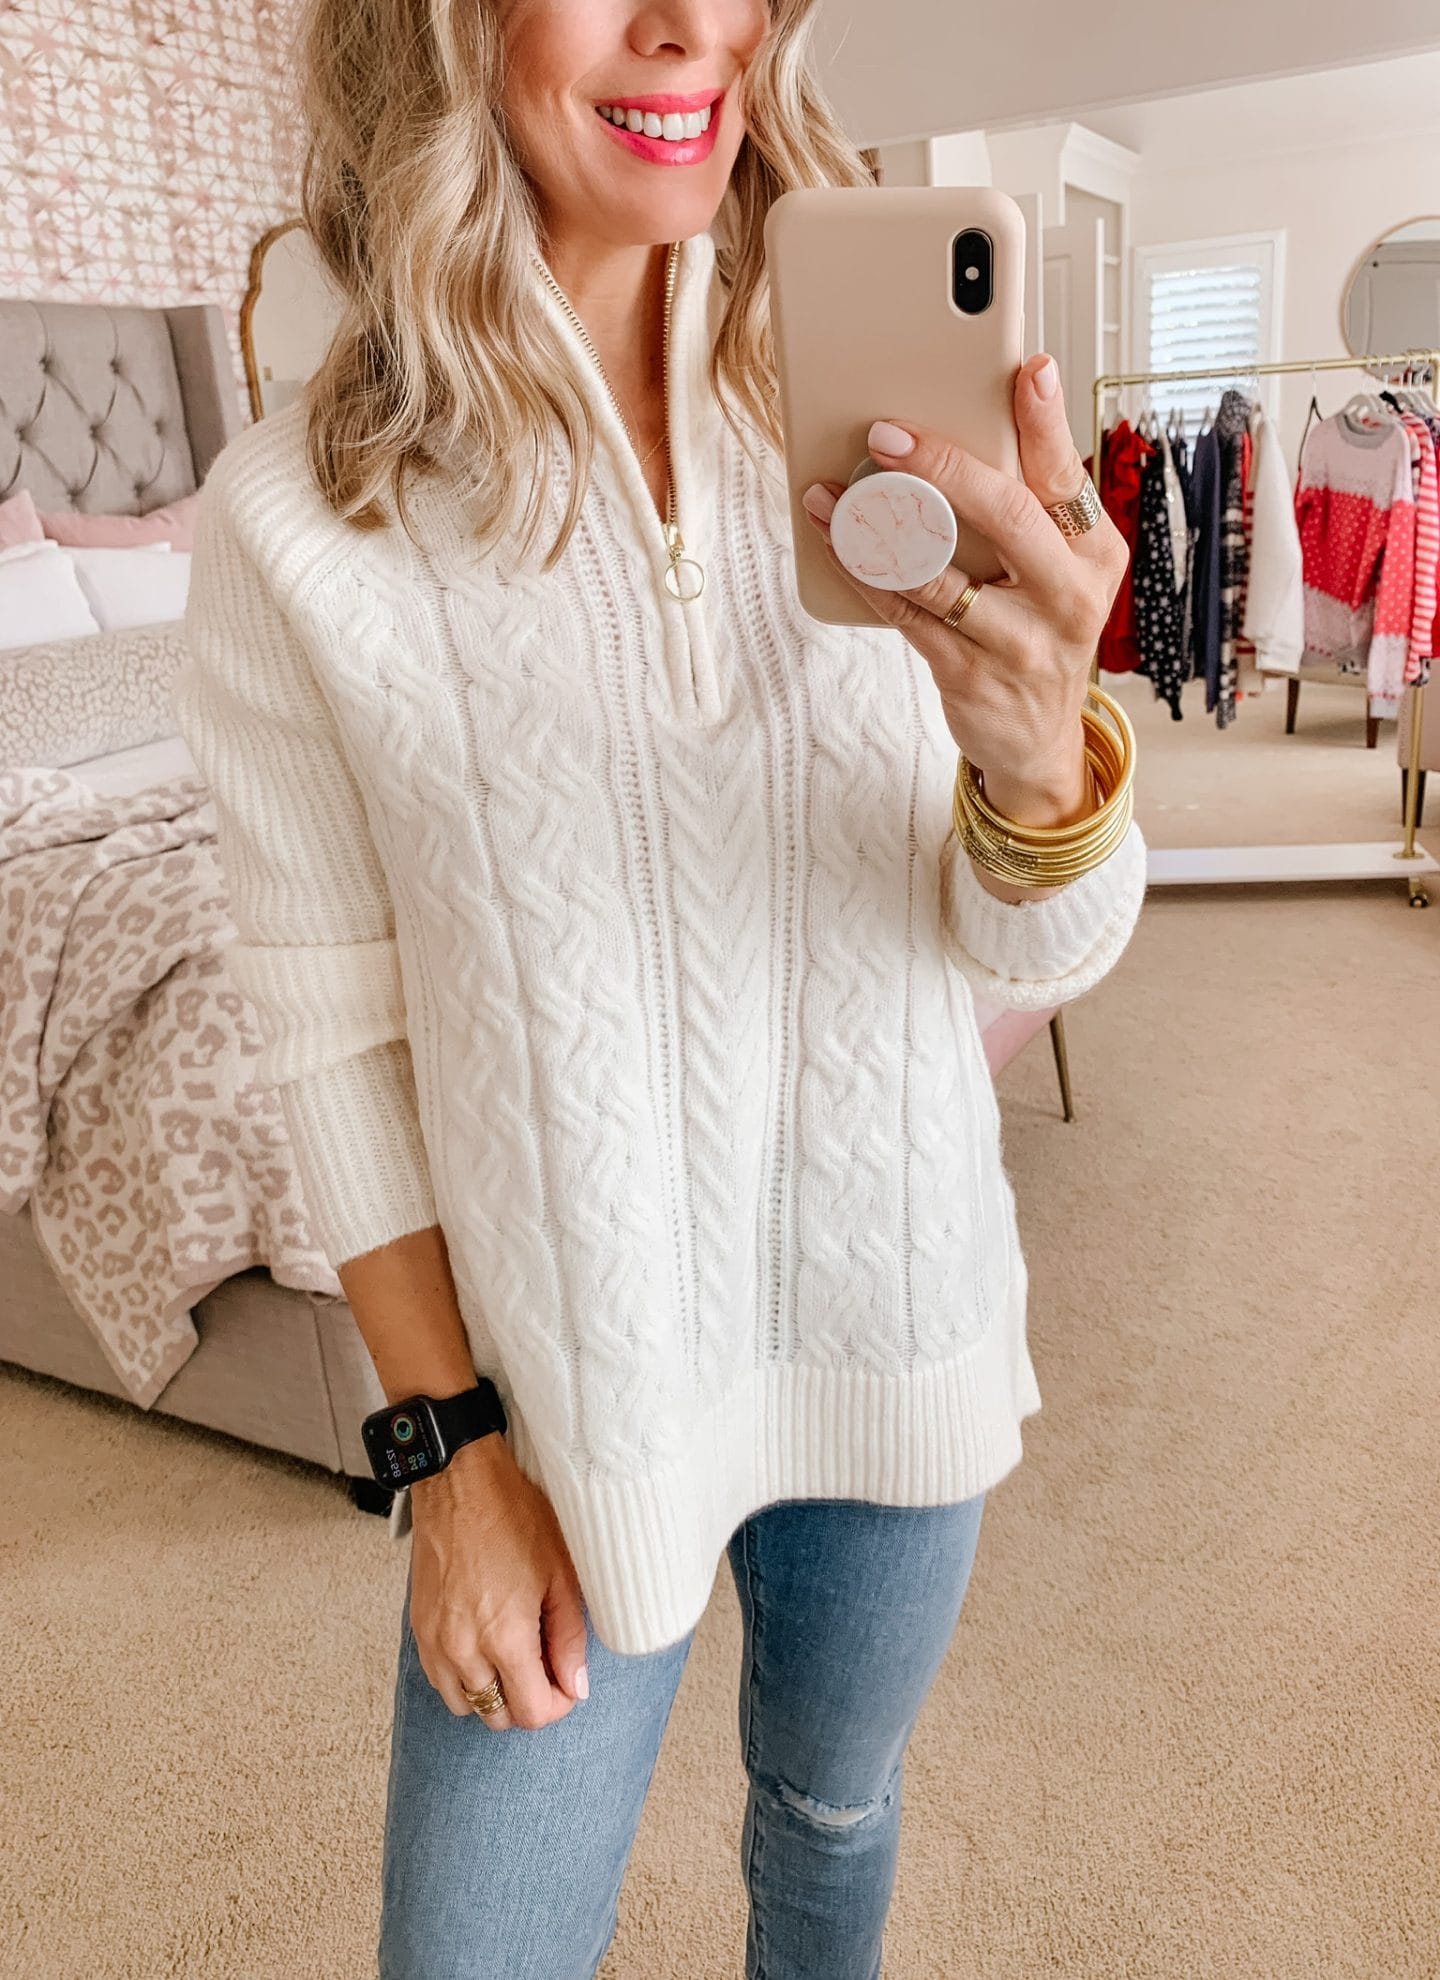 Cable Knit Half Zip Sweater, Jeans